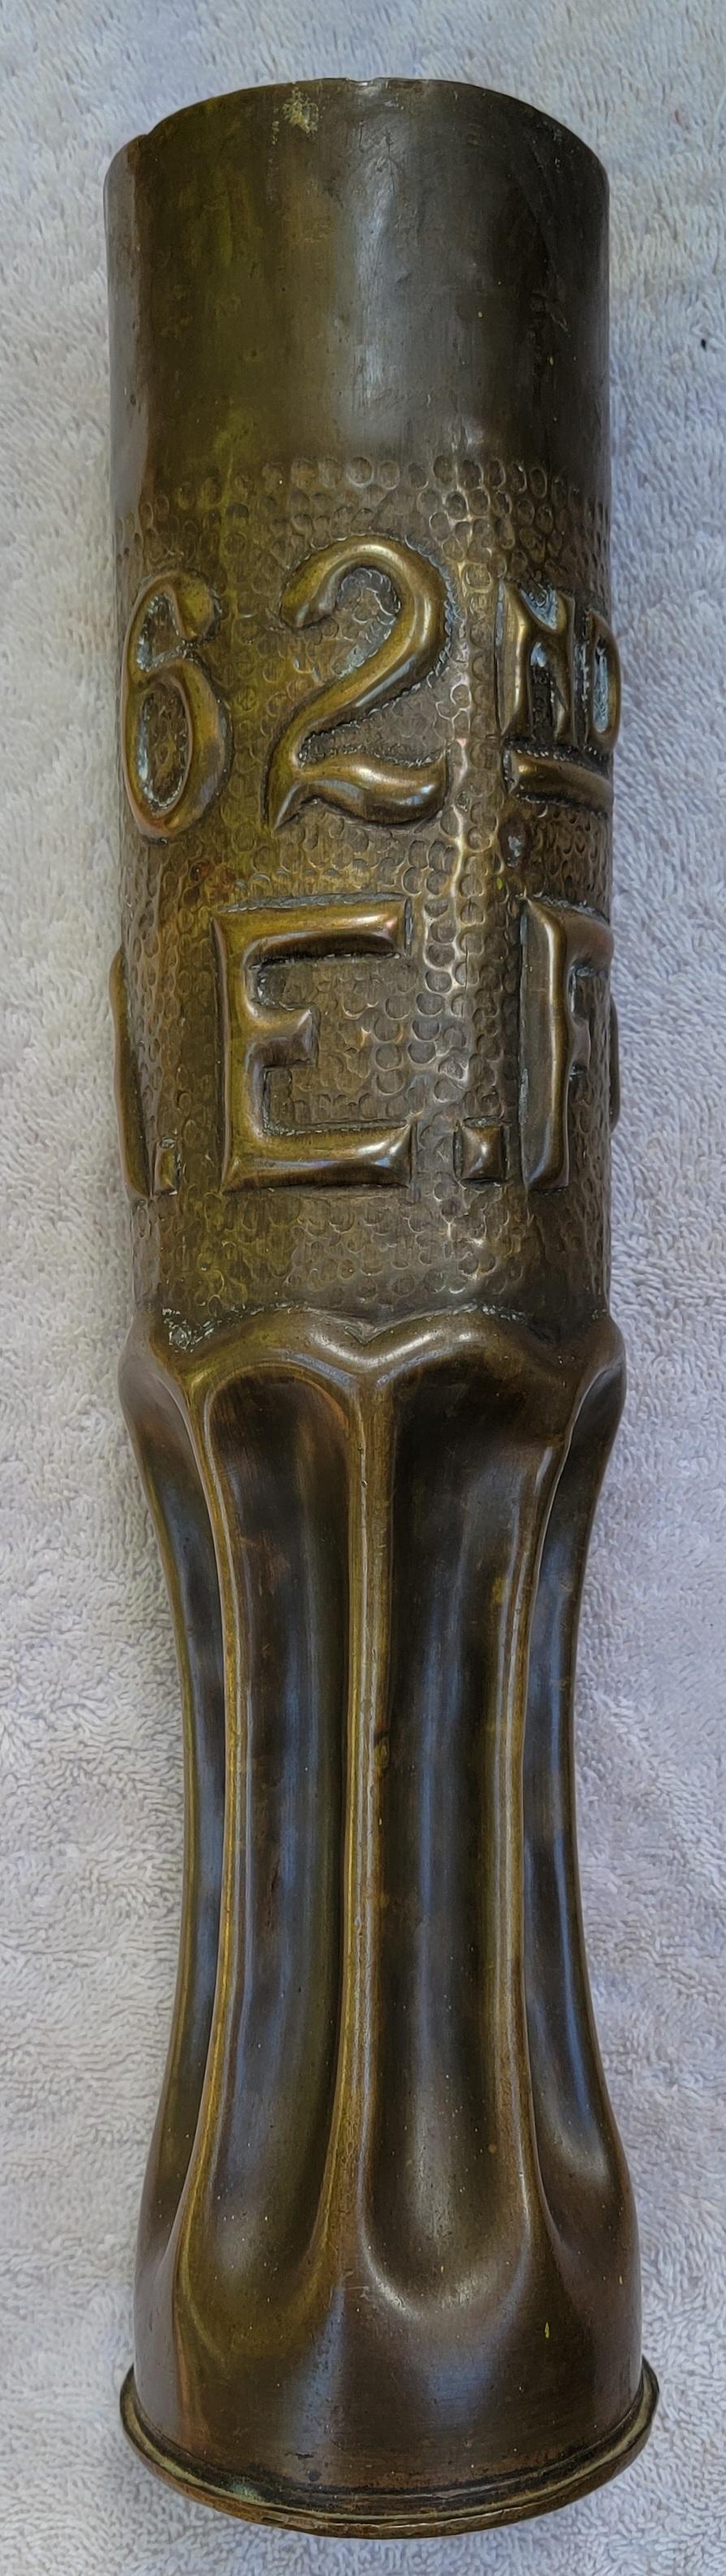 Extraordinary example of WWl Trench Art. Historical significance as this vase is signed by the soldier that crafted it, 